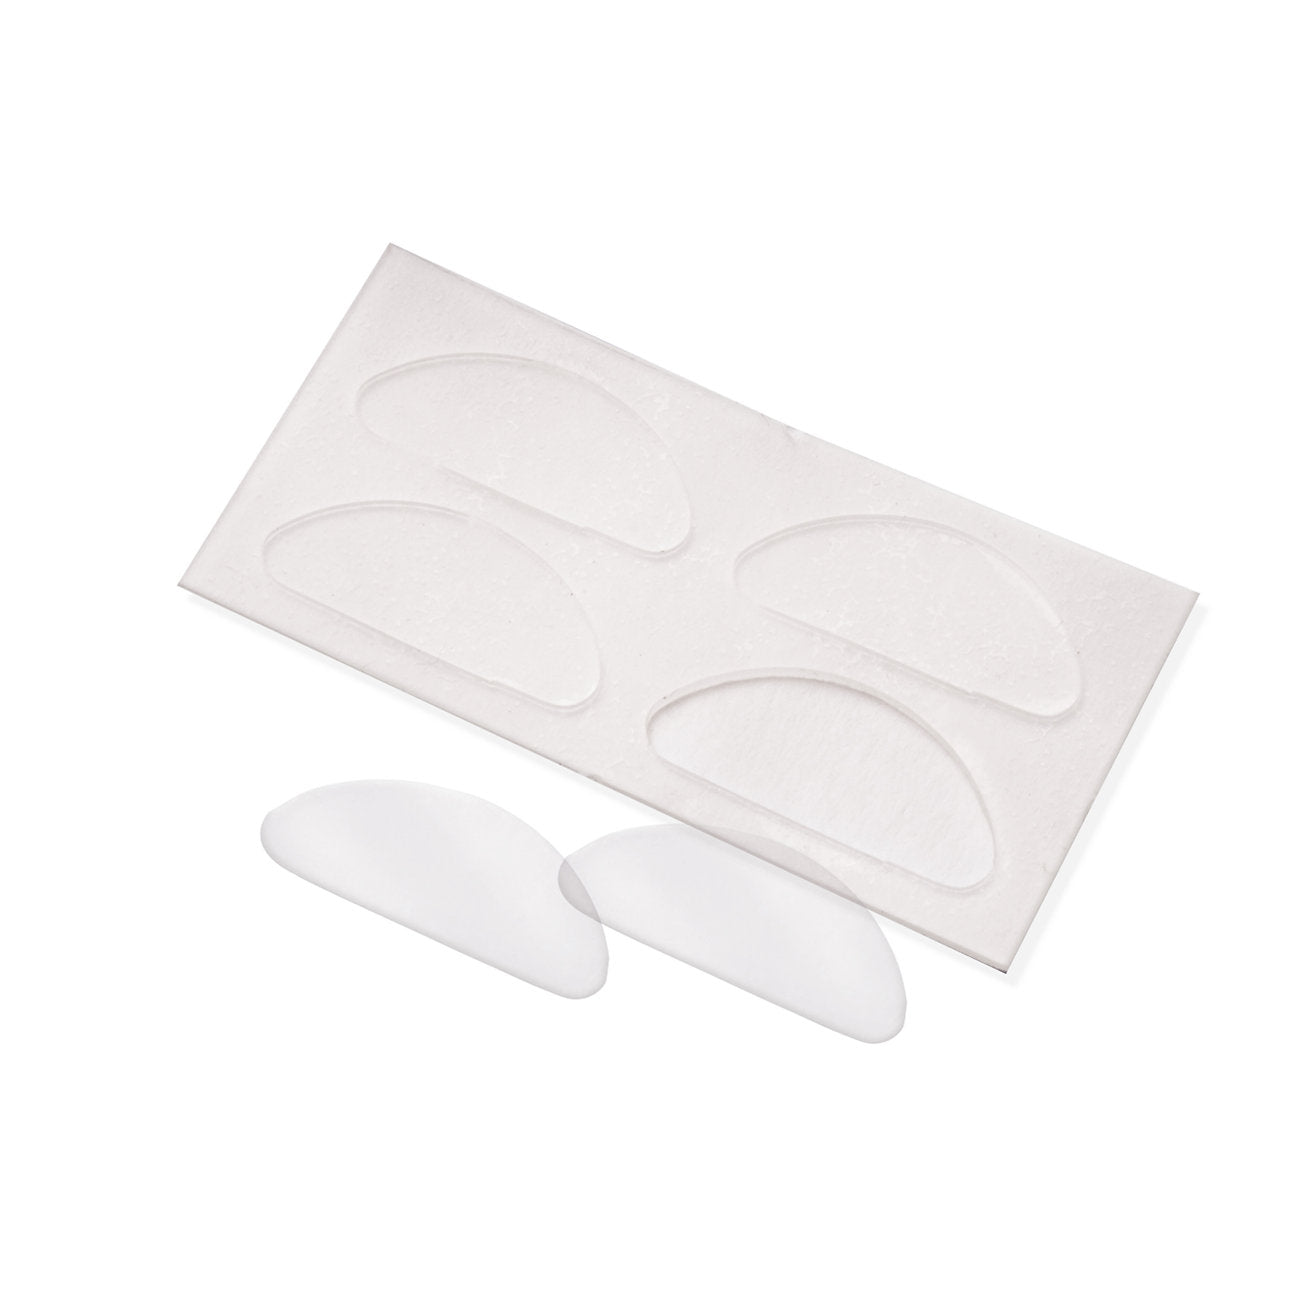 Trimmable adhesive silicone nose pads